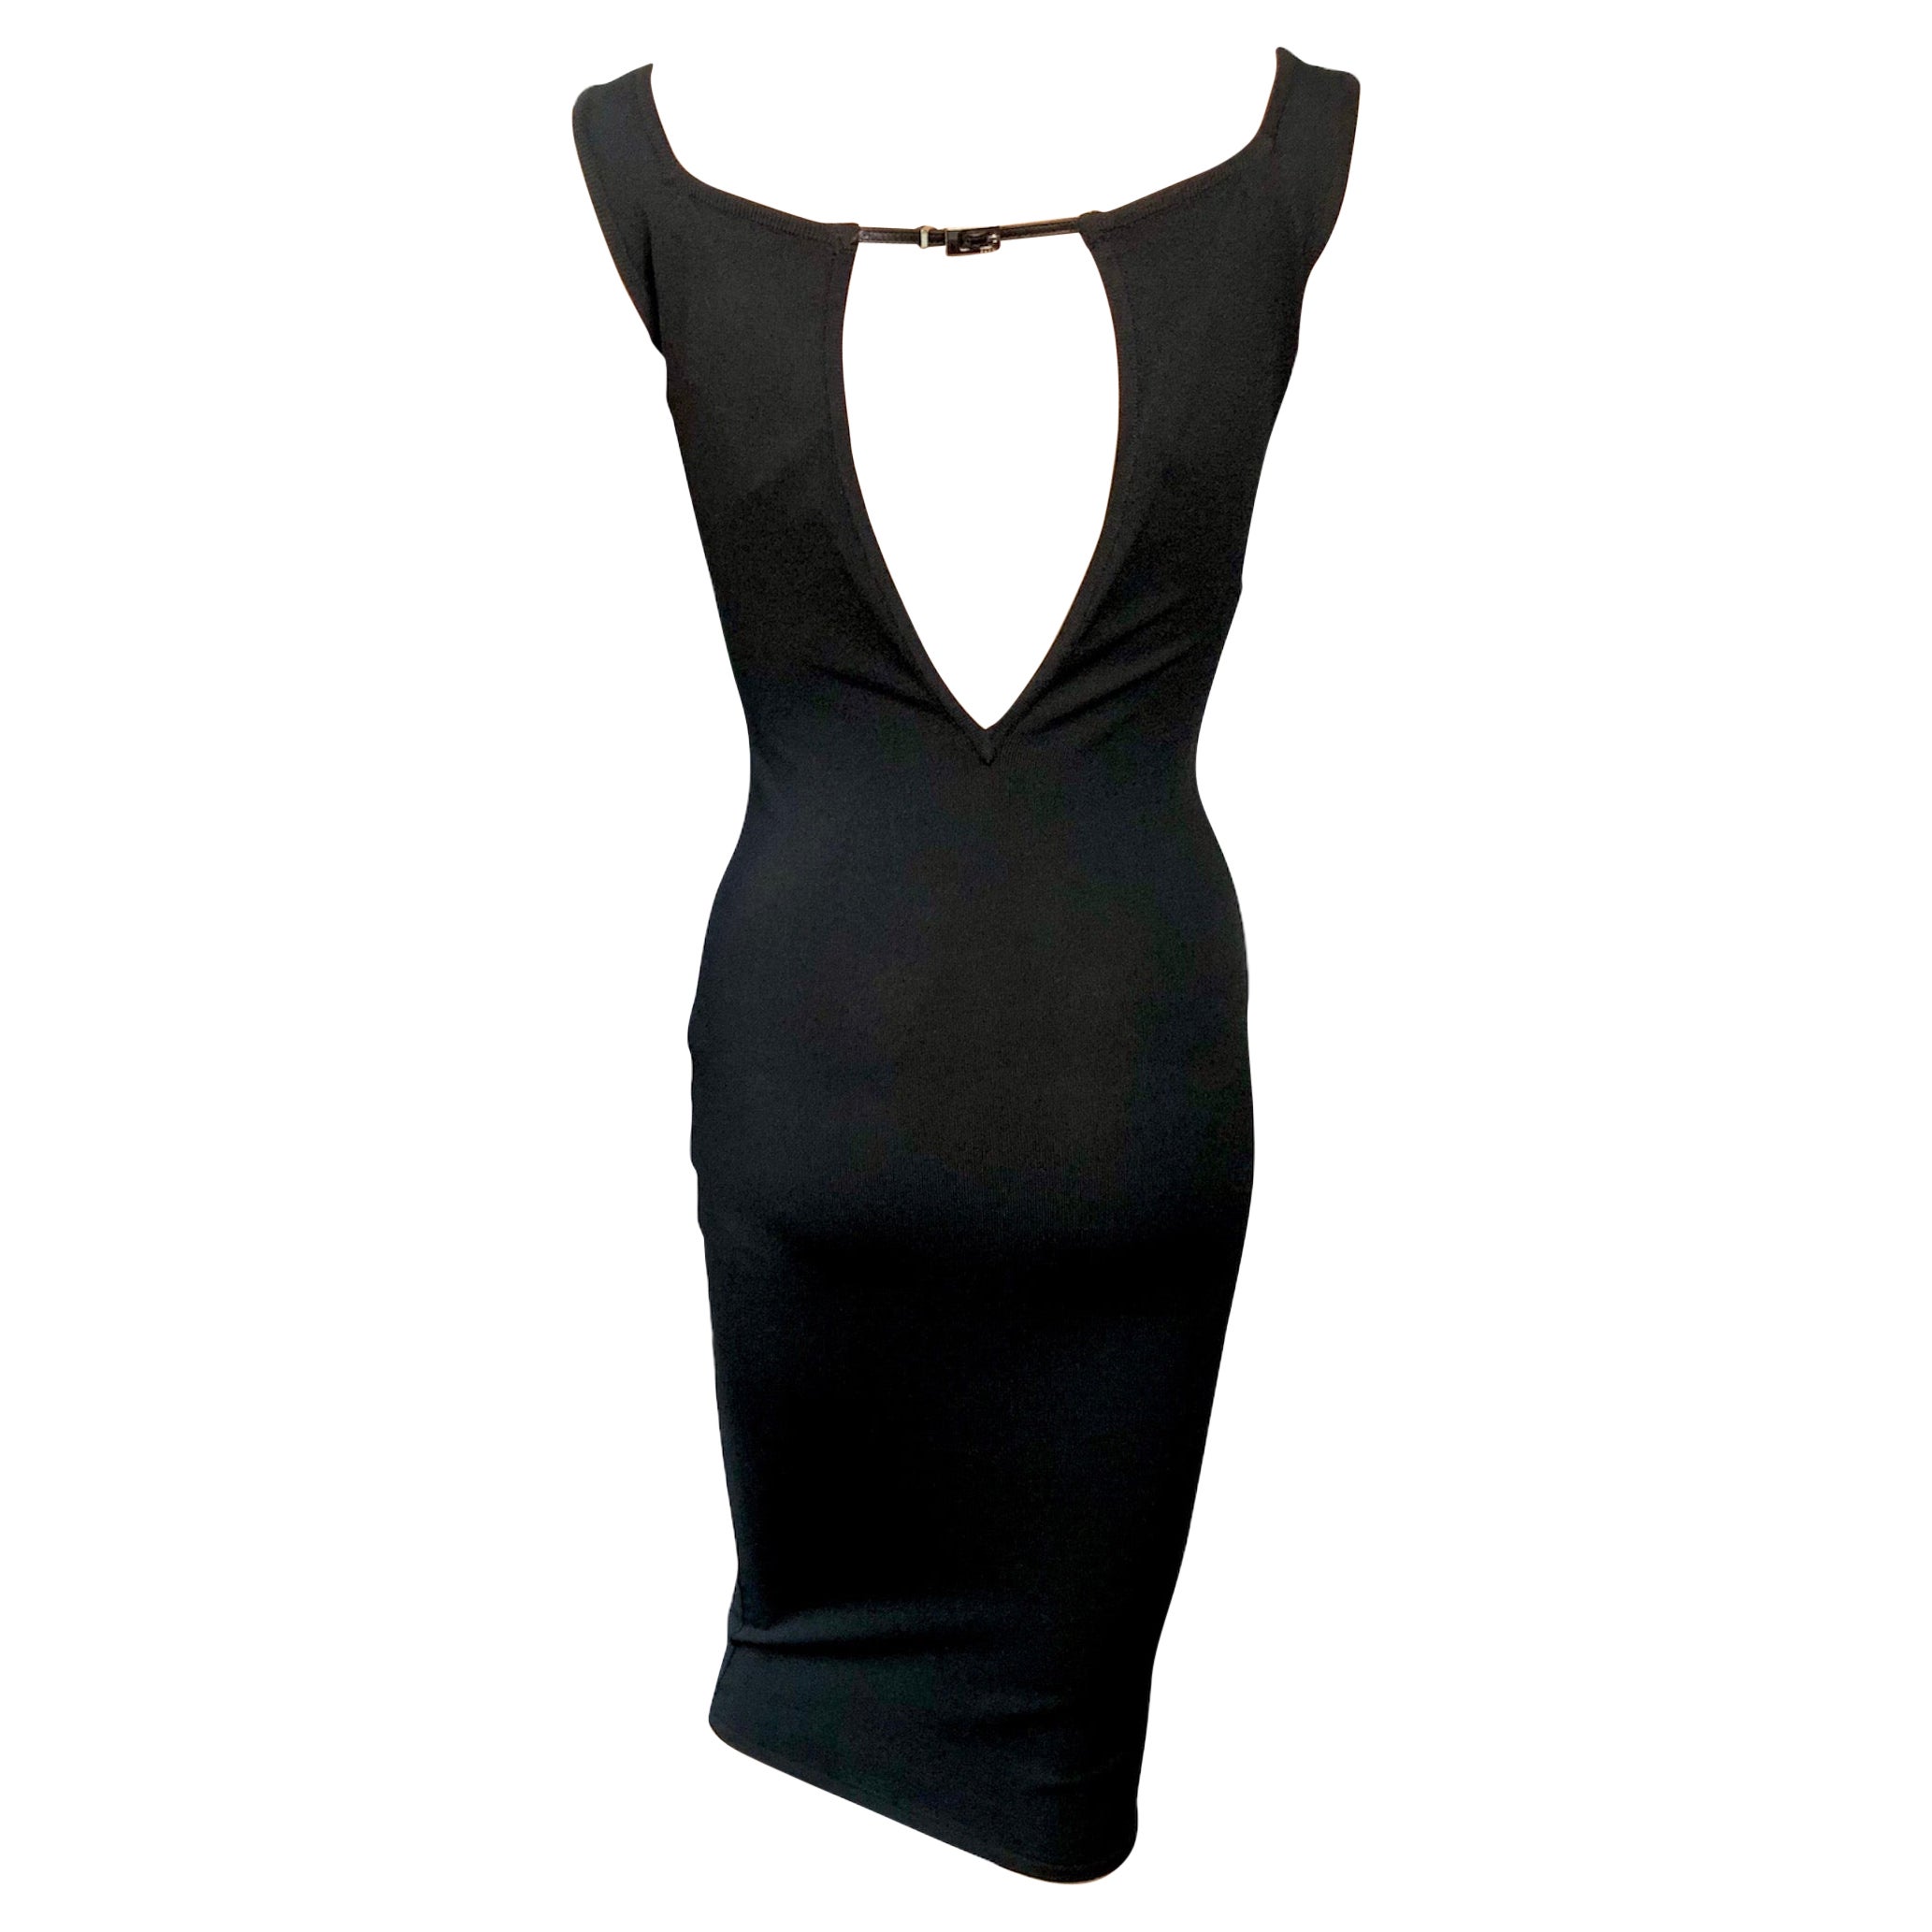 Tom Ford for Gucci S/S 1998 Bodycon Cutout Back Buckled Knit Black Midi Dress